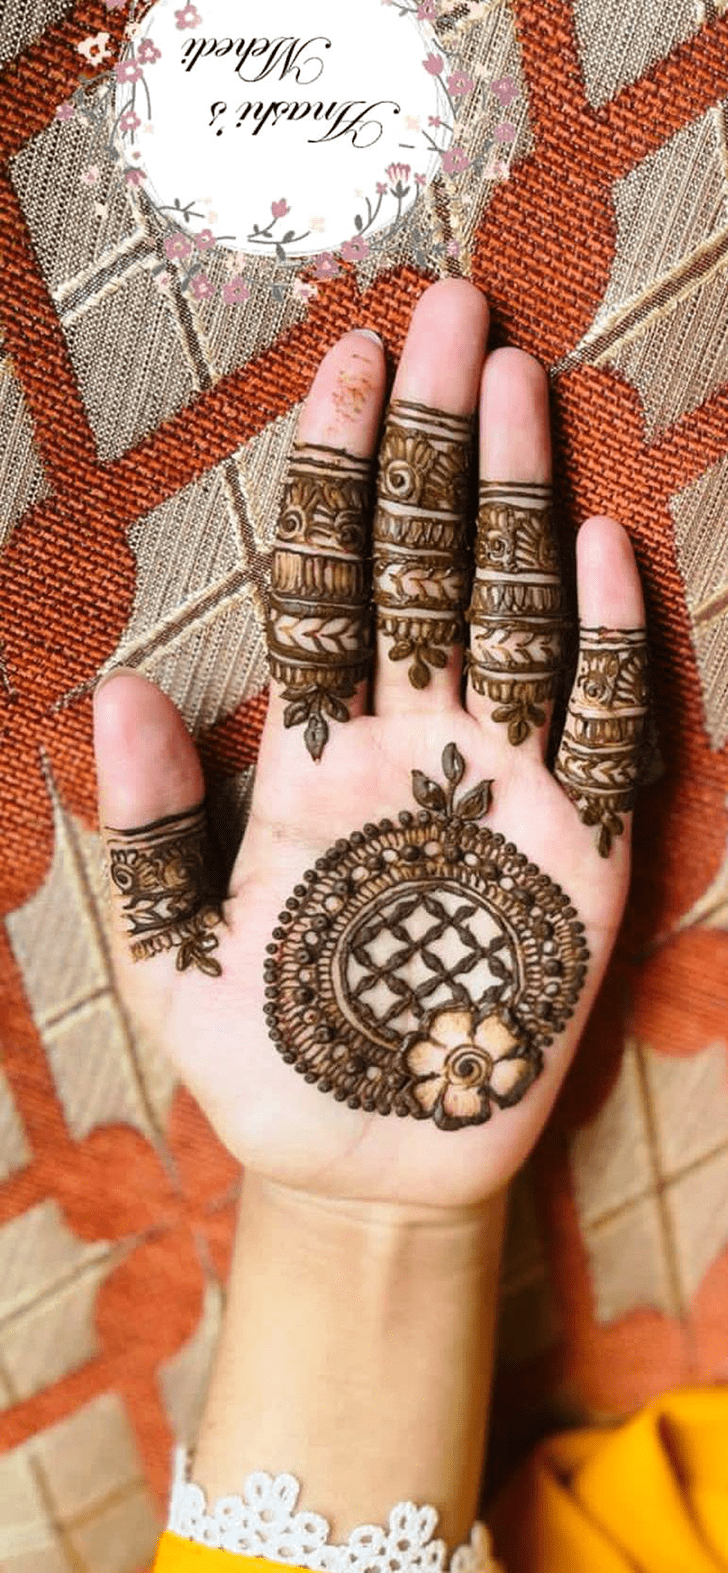 Awesome Finland Henna Design